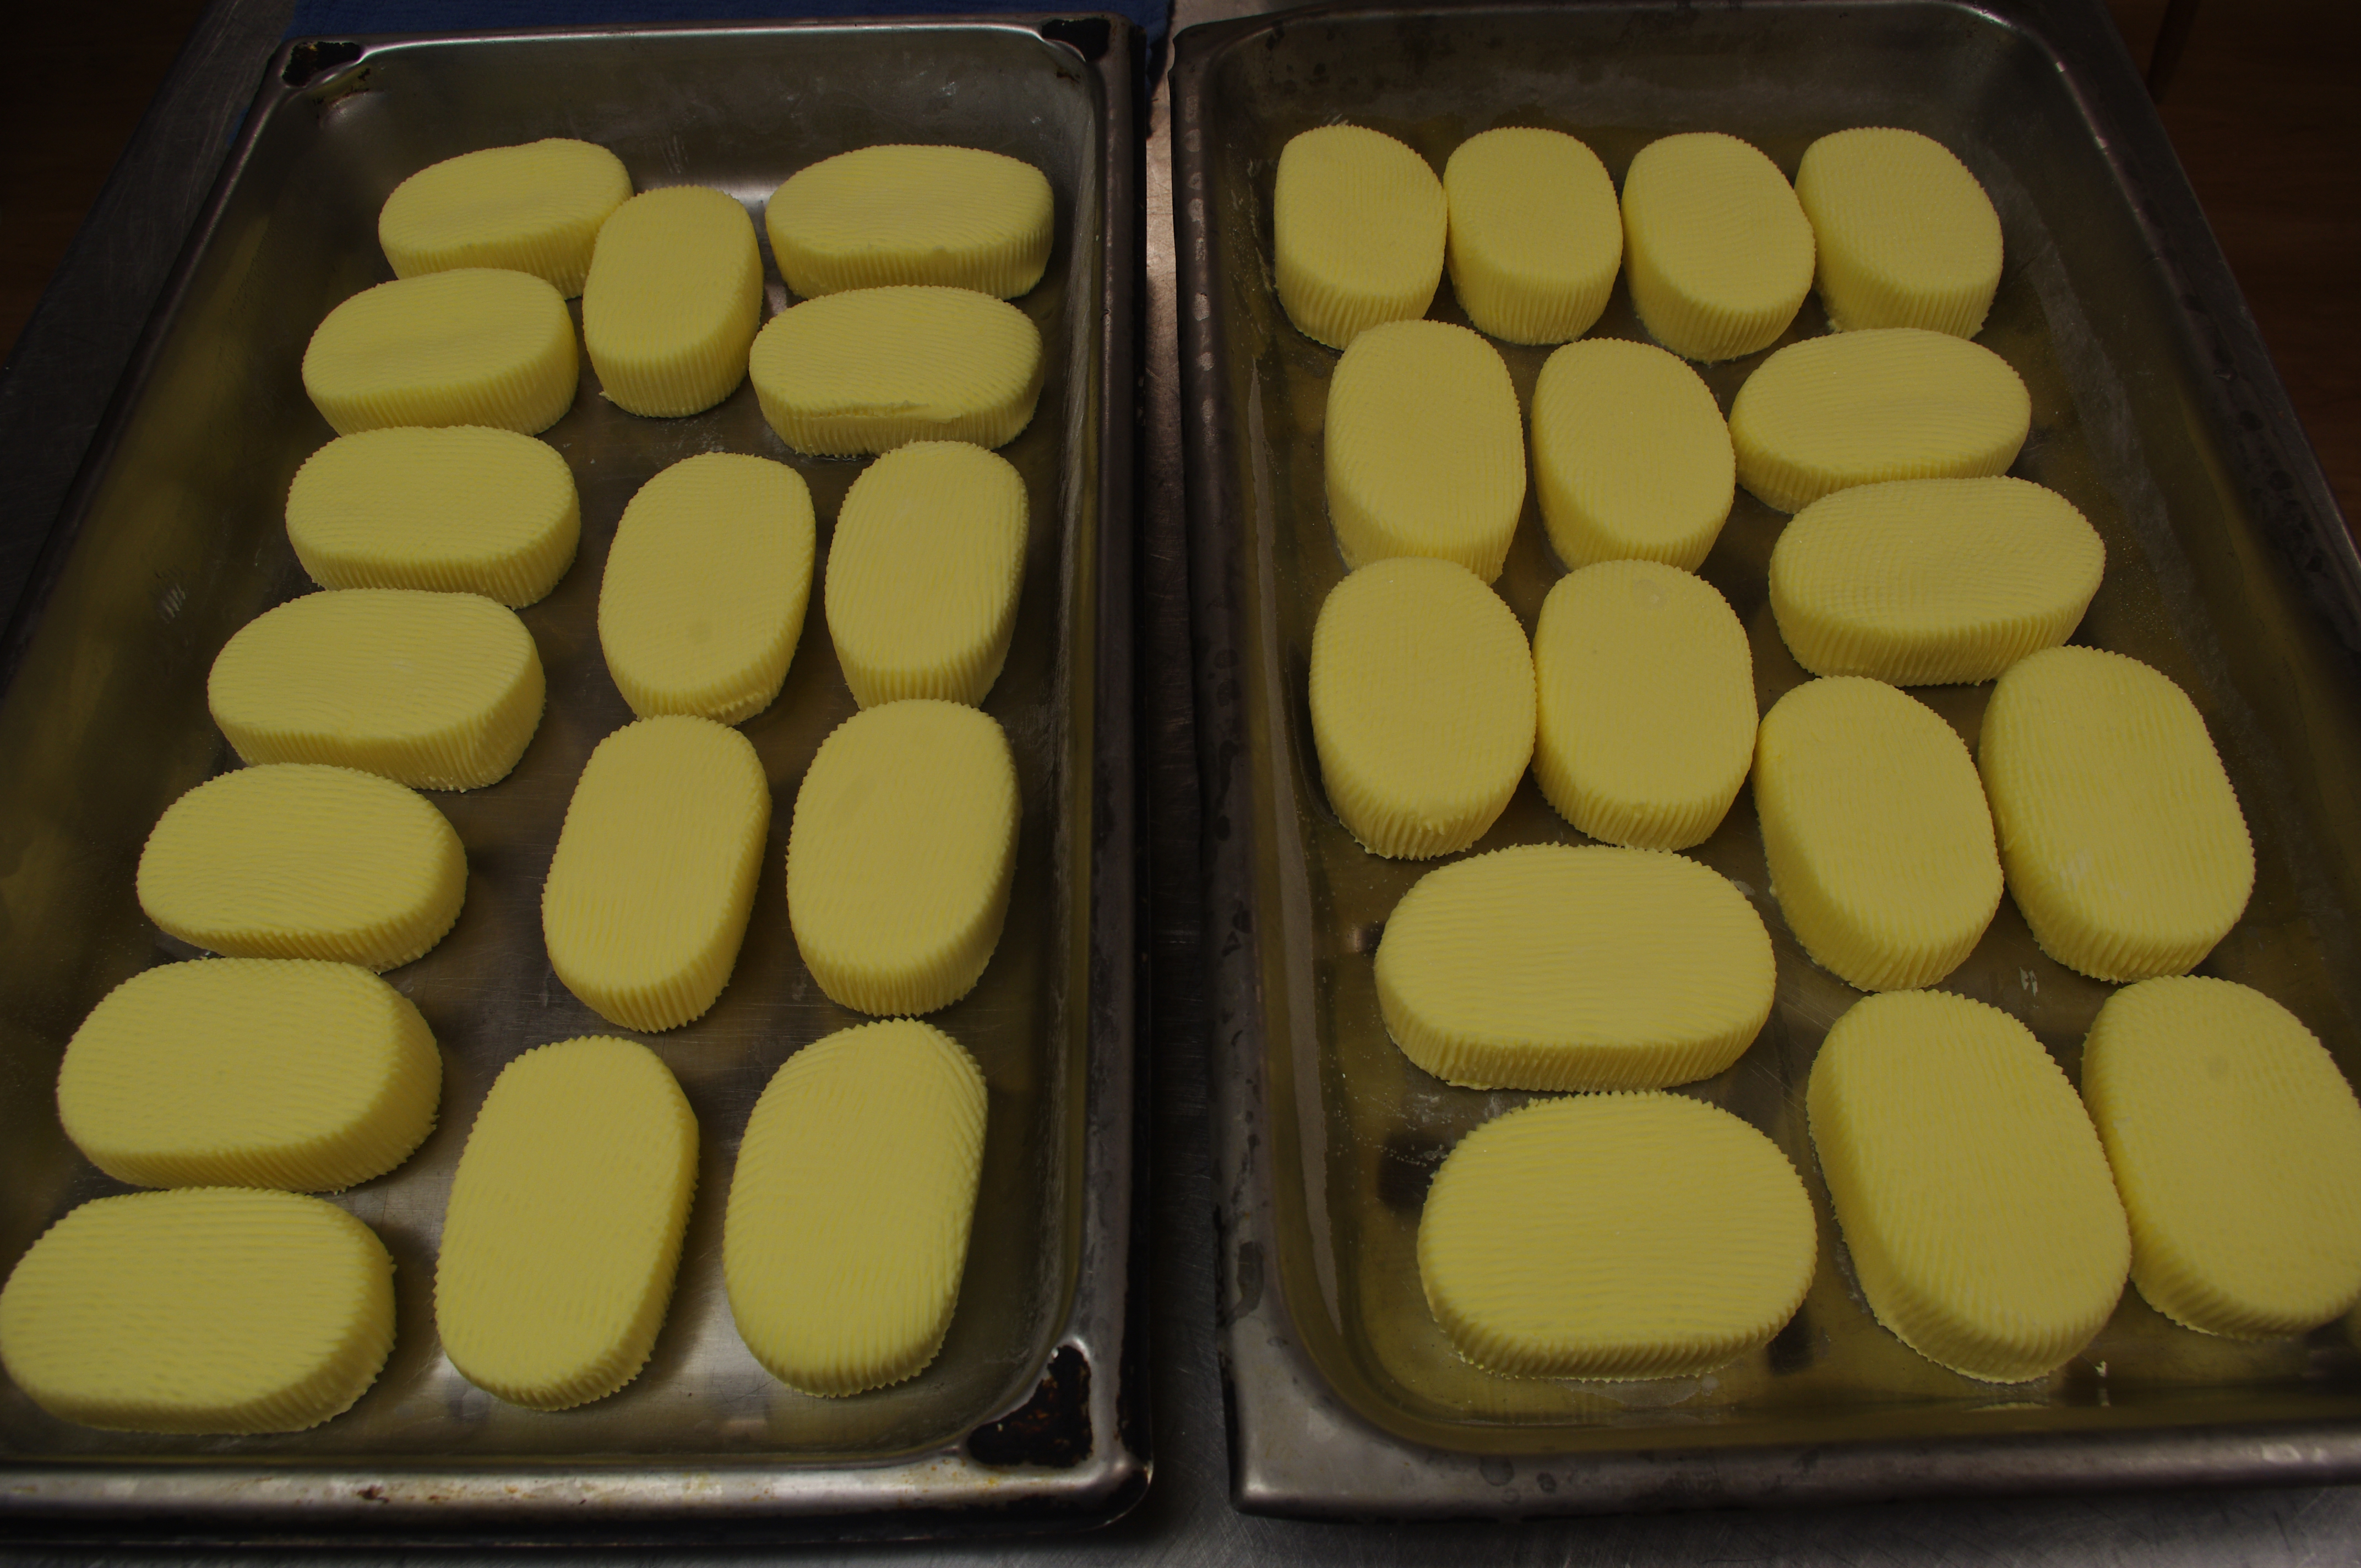 Ages made the cakes of butter above using cream from the Community's cows